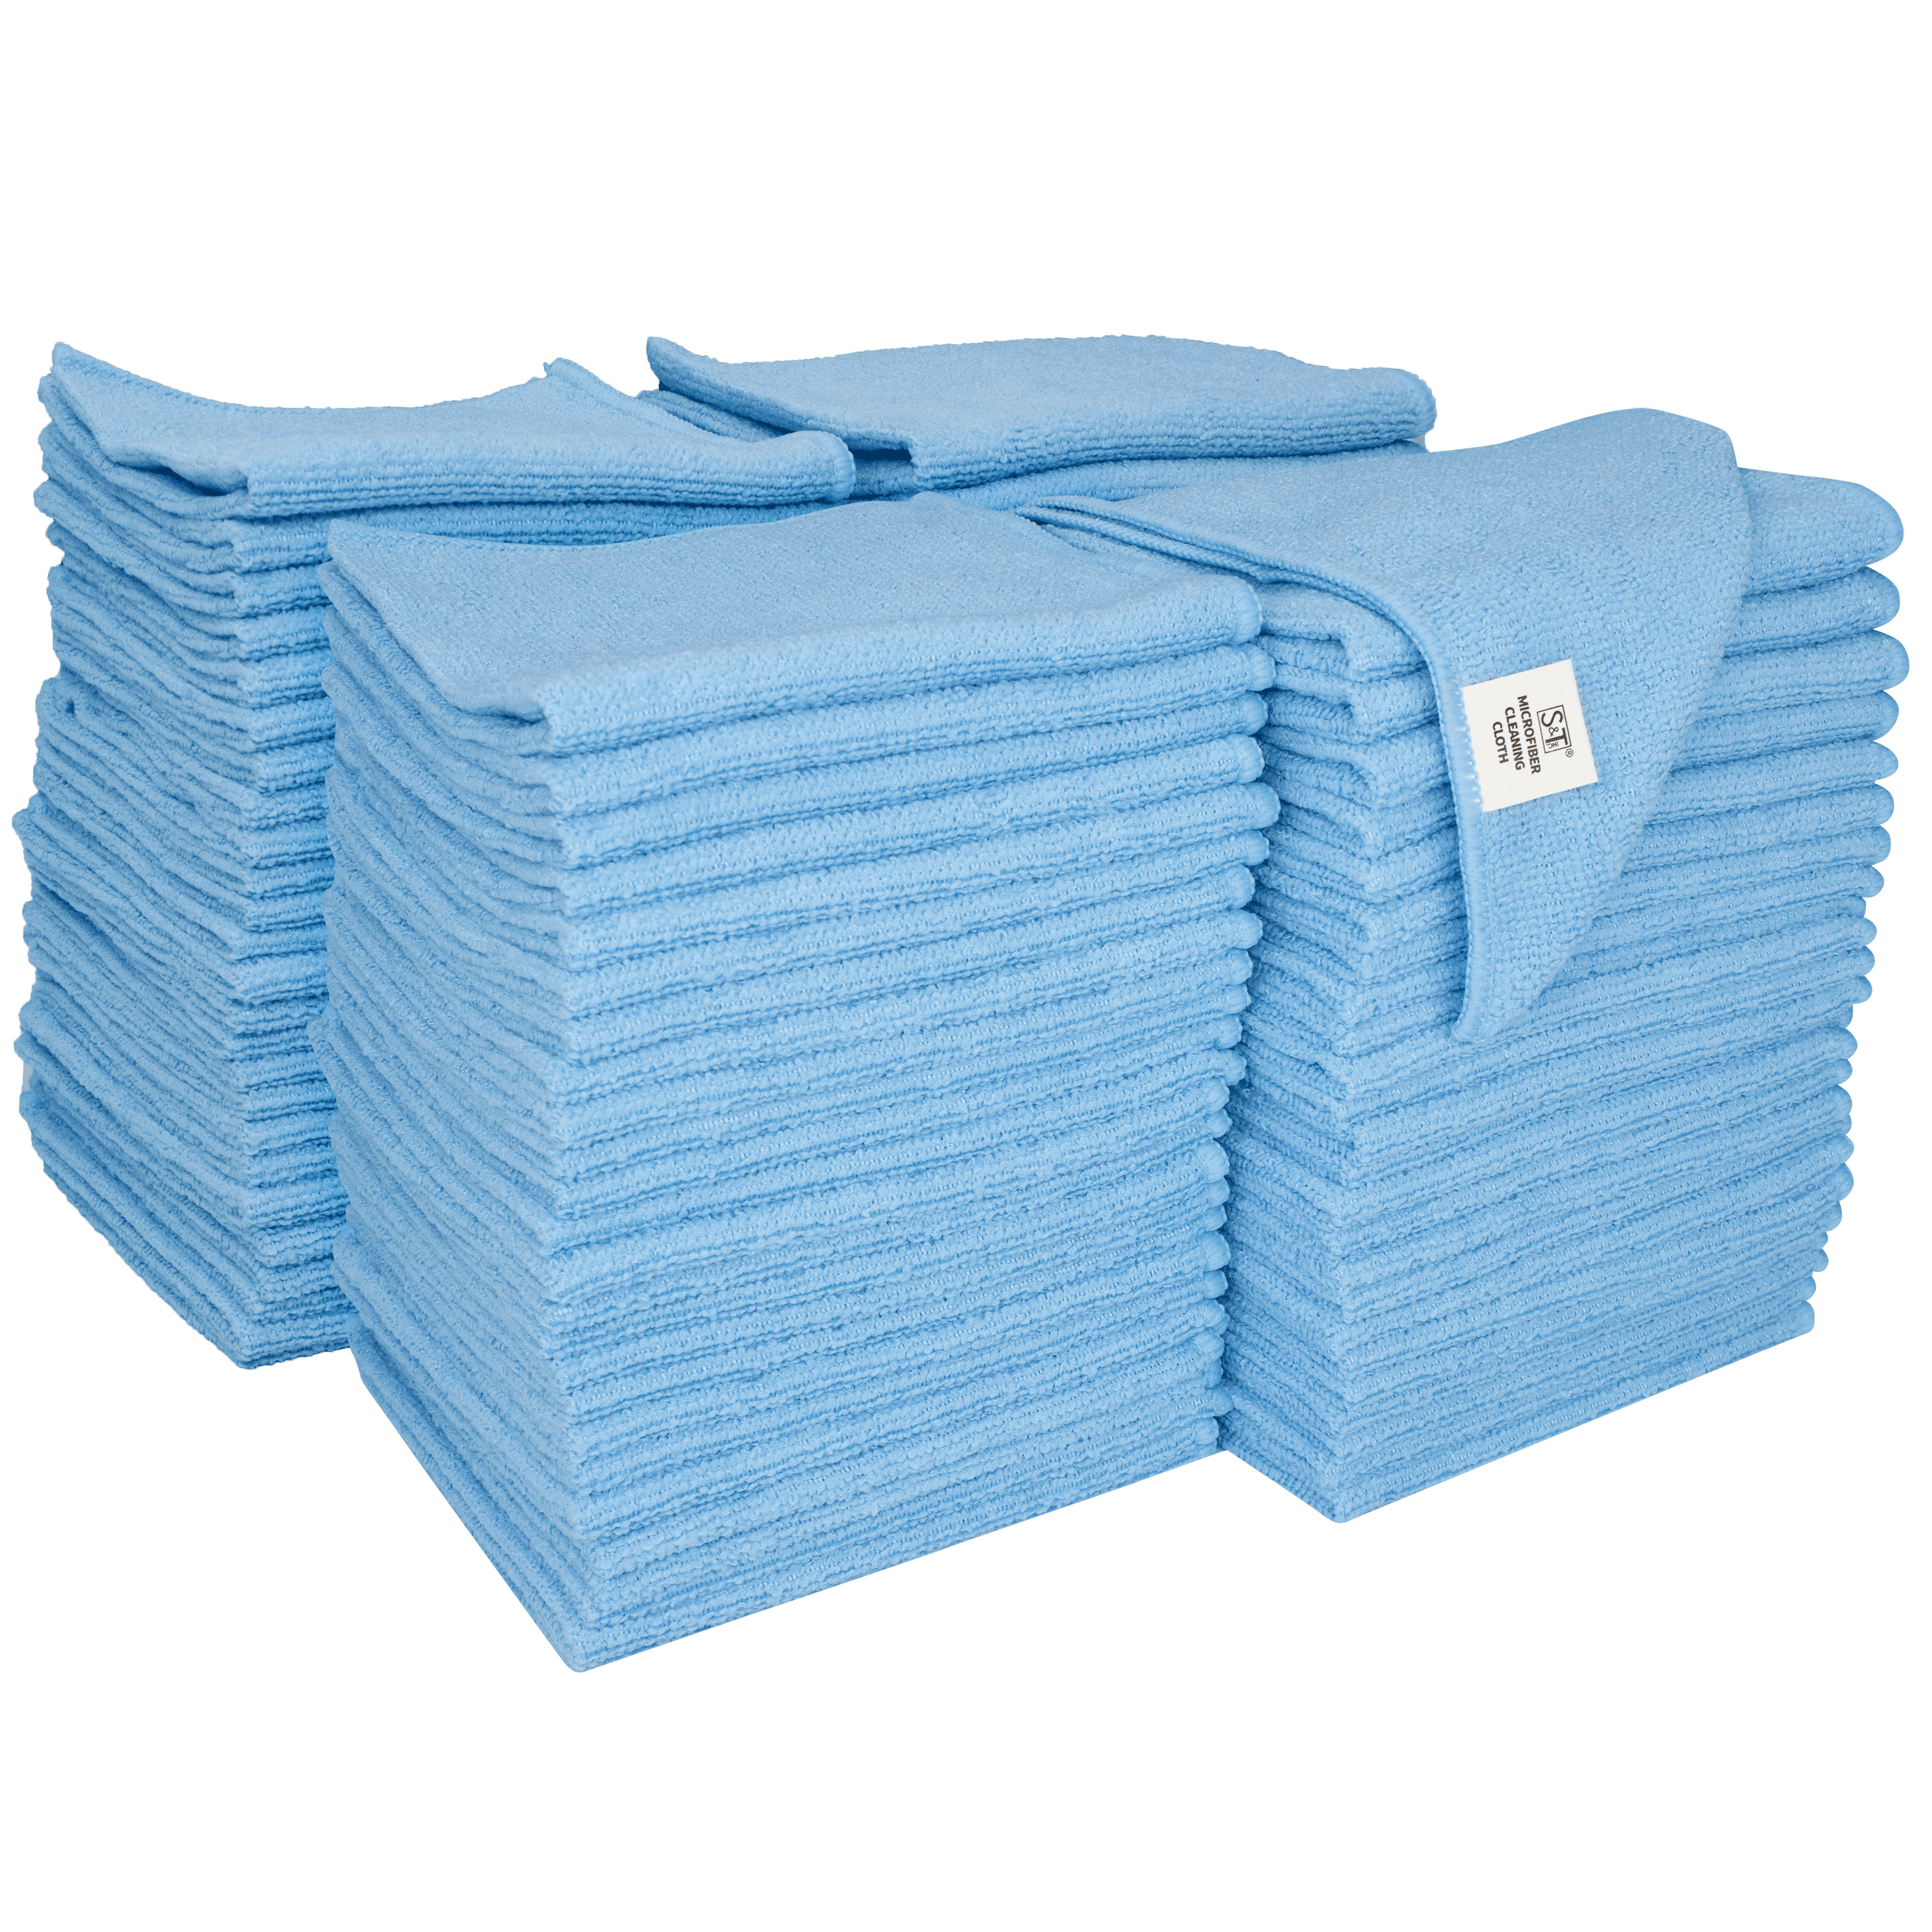 S&T Inc. Microfiber Cleaning Cloths, Reusable and Lint-Free Towels for Home, Kitchen and Auto, 11.5 inch x 11.5 inch, 25 Pack, Assorted